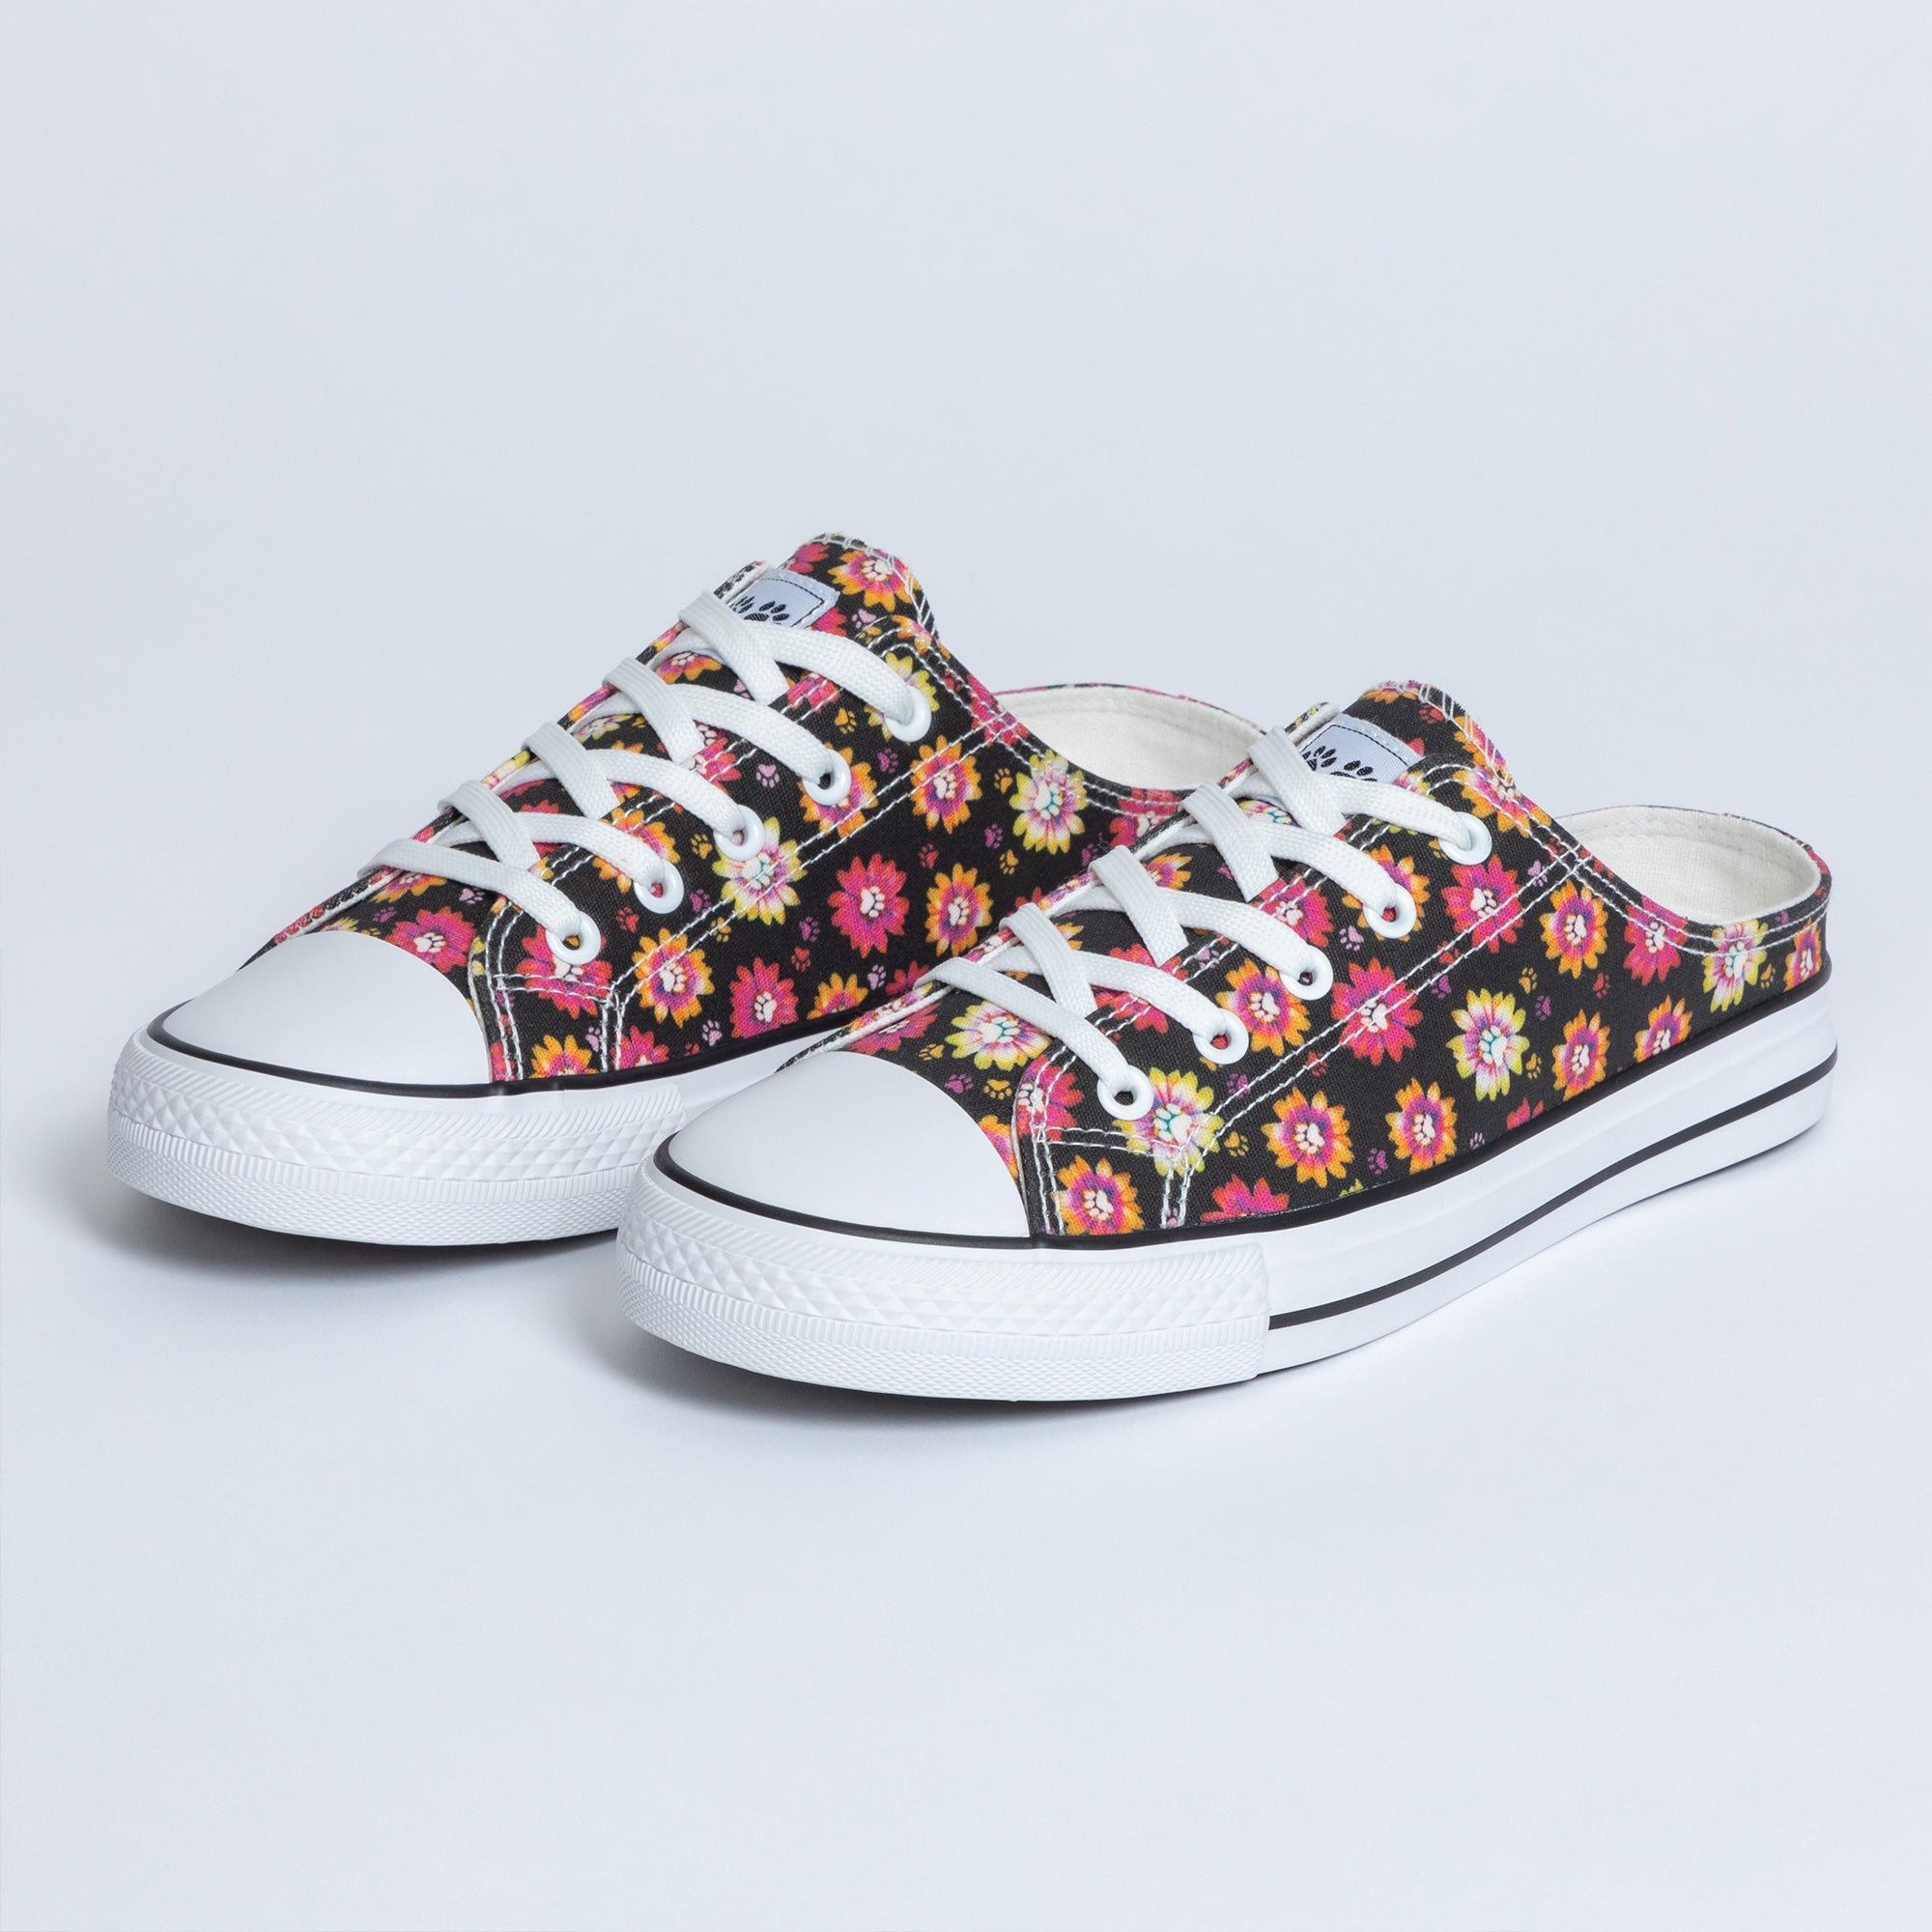 Paw Print Canvas Slip-On Sneakers - Pretty Paw Daisies - 6